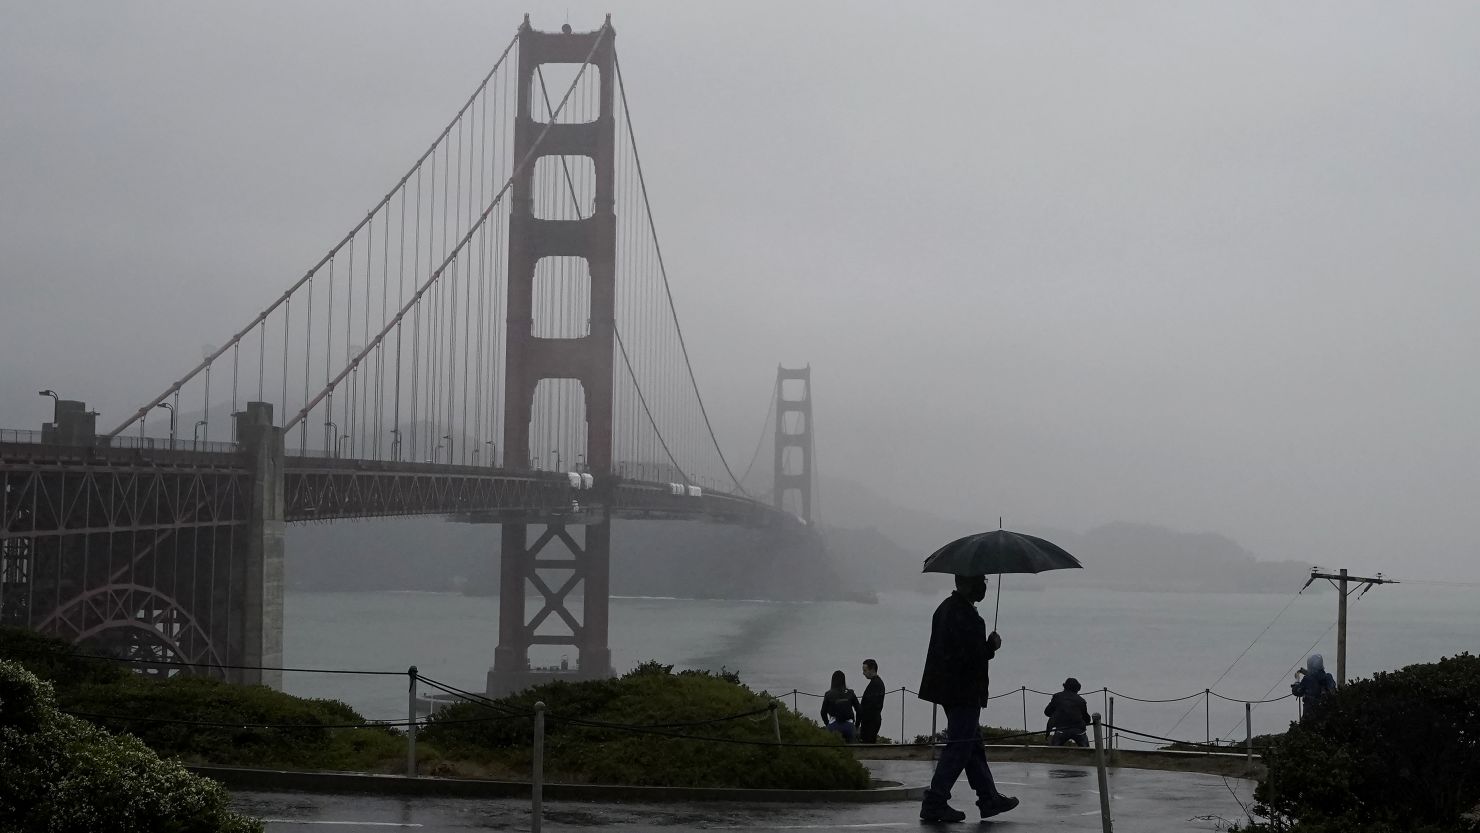 Showers drifted across the drought-stricken and fire-scarred landscape of Northern California on October 20, 2021, followed by a series of stronger storms that are expected to bring significant rain and snow into next week, forecasters said.